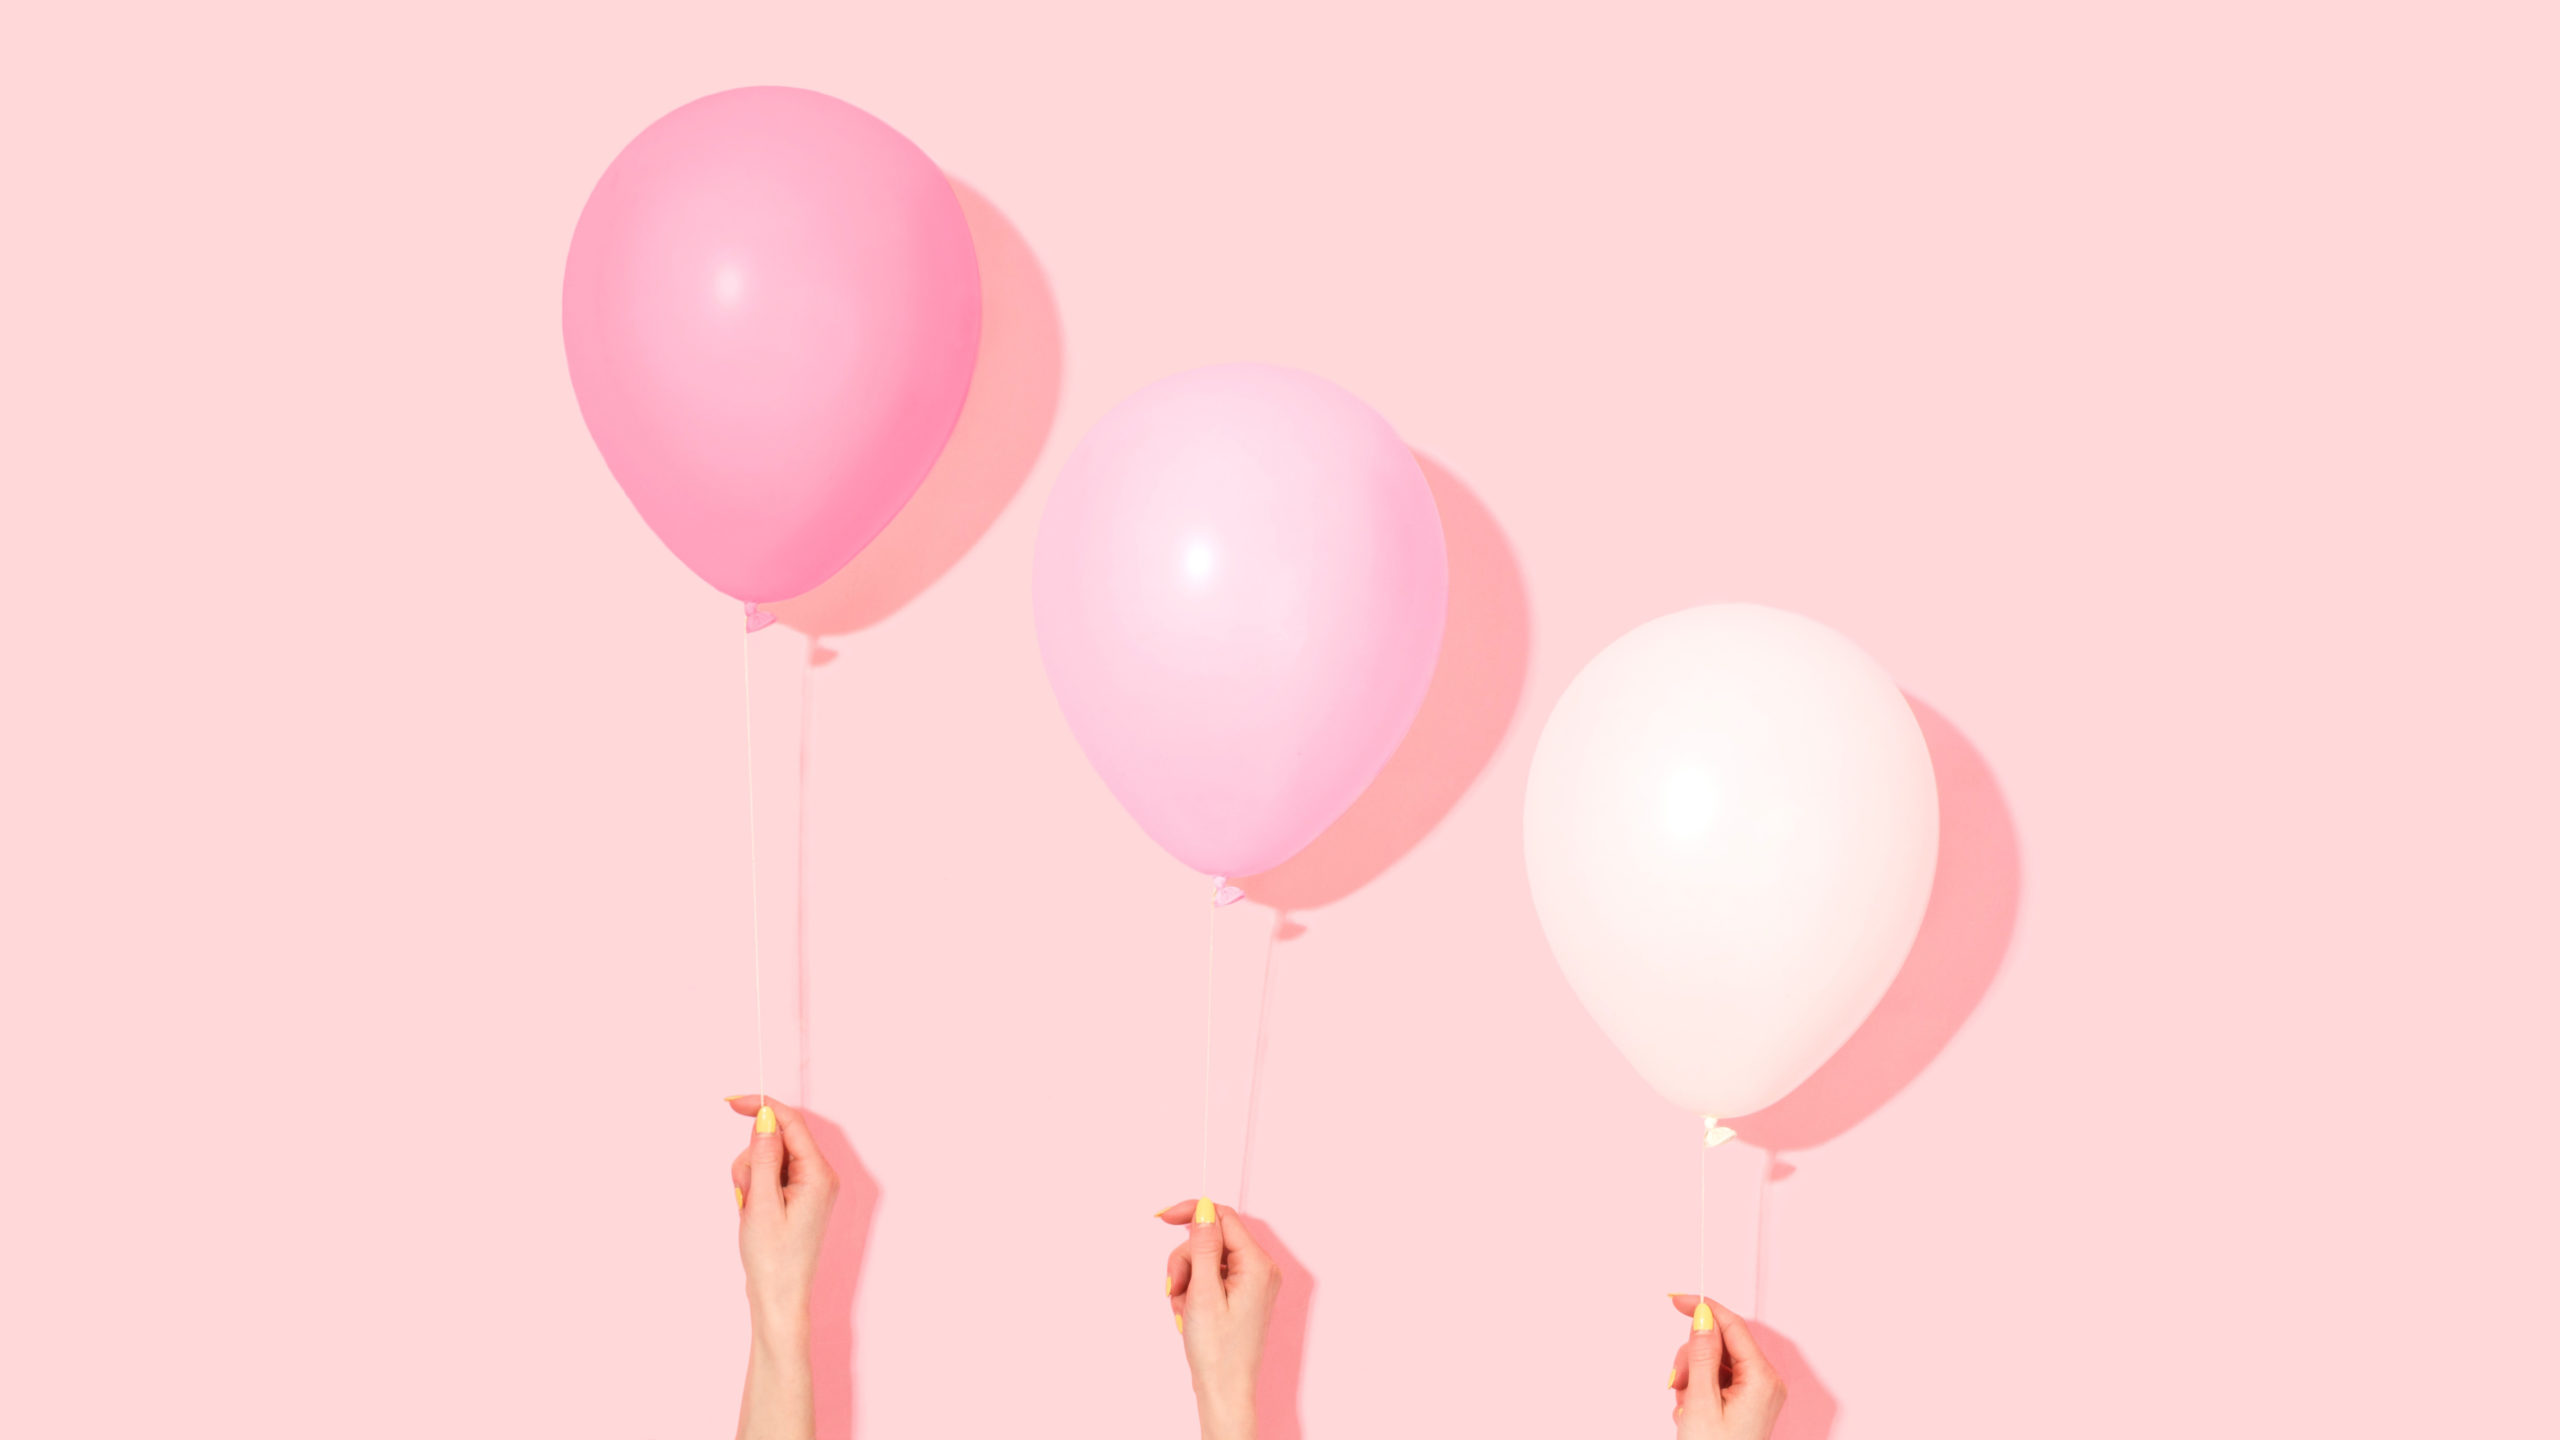 What Does Pink Mean To You? - Rethink Breast Cancer